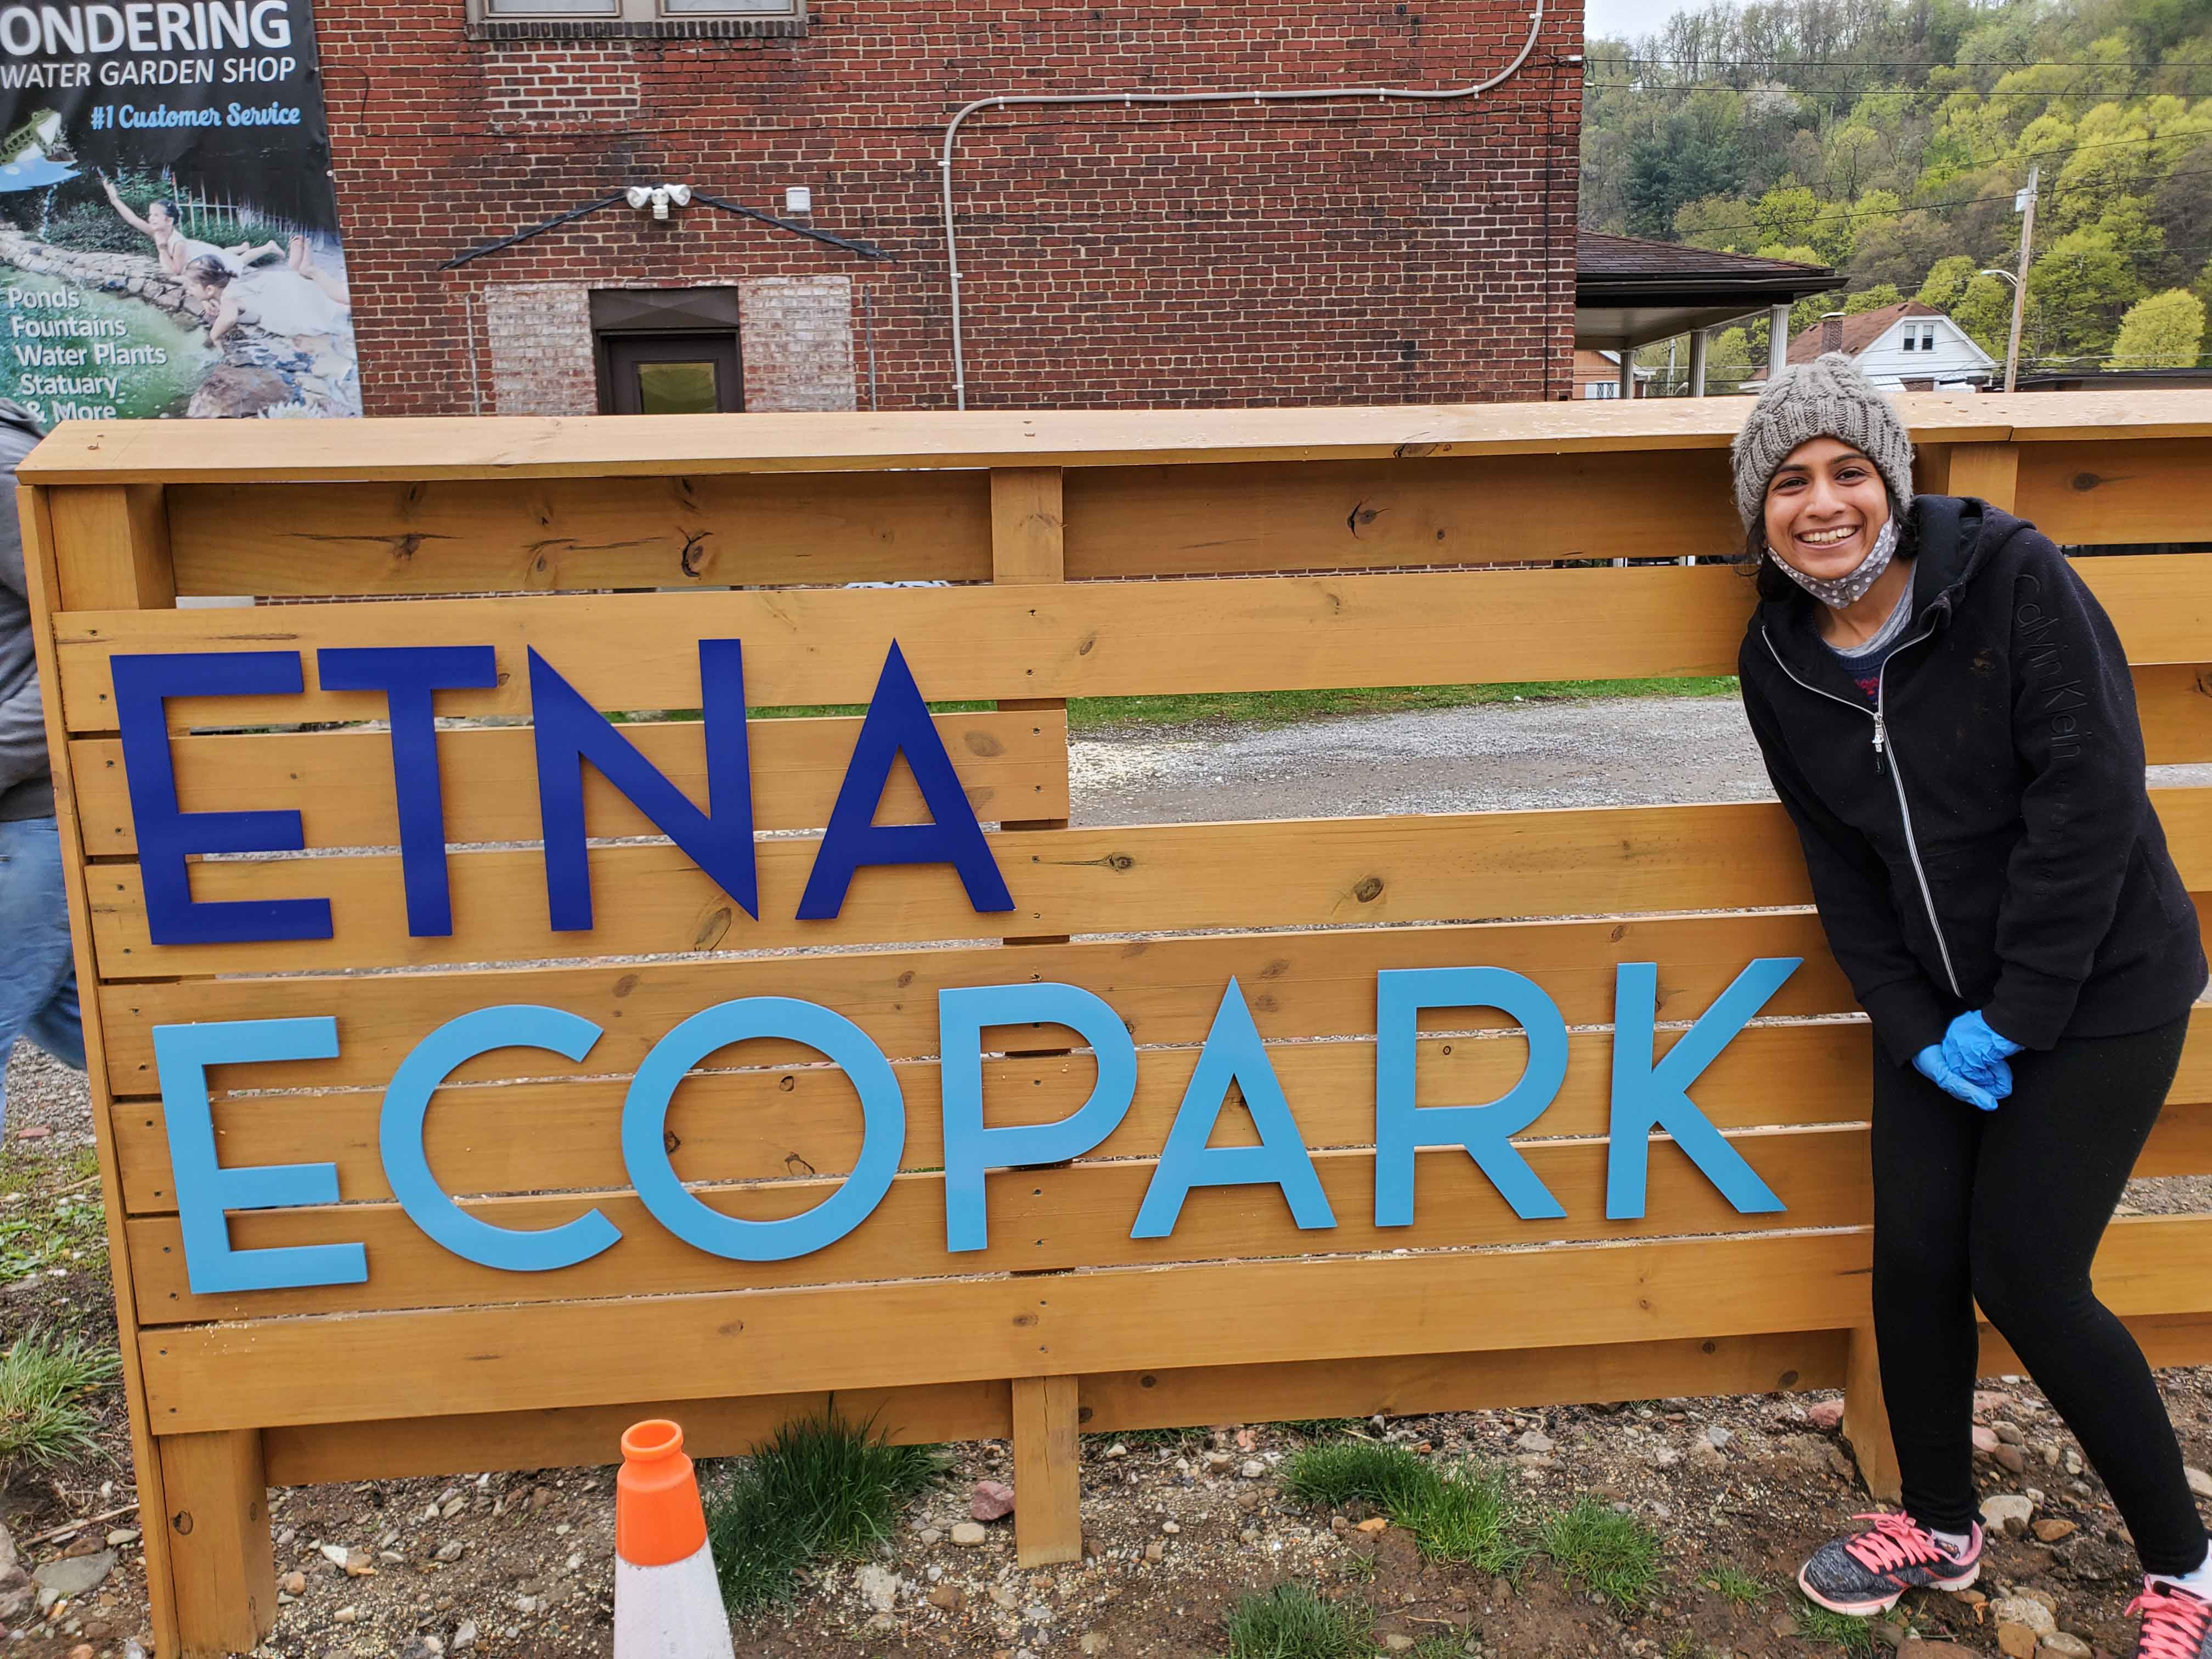 Etna is proud to announce  the opening of the Etna Eco Park